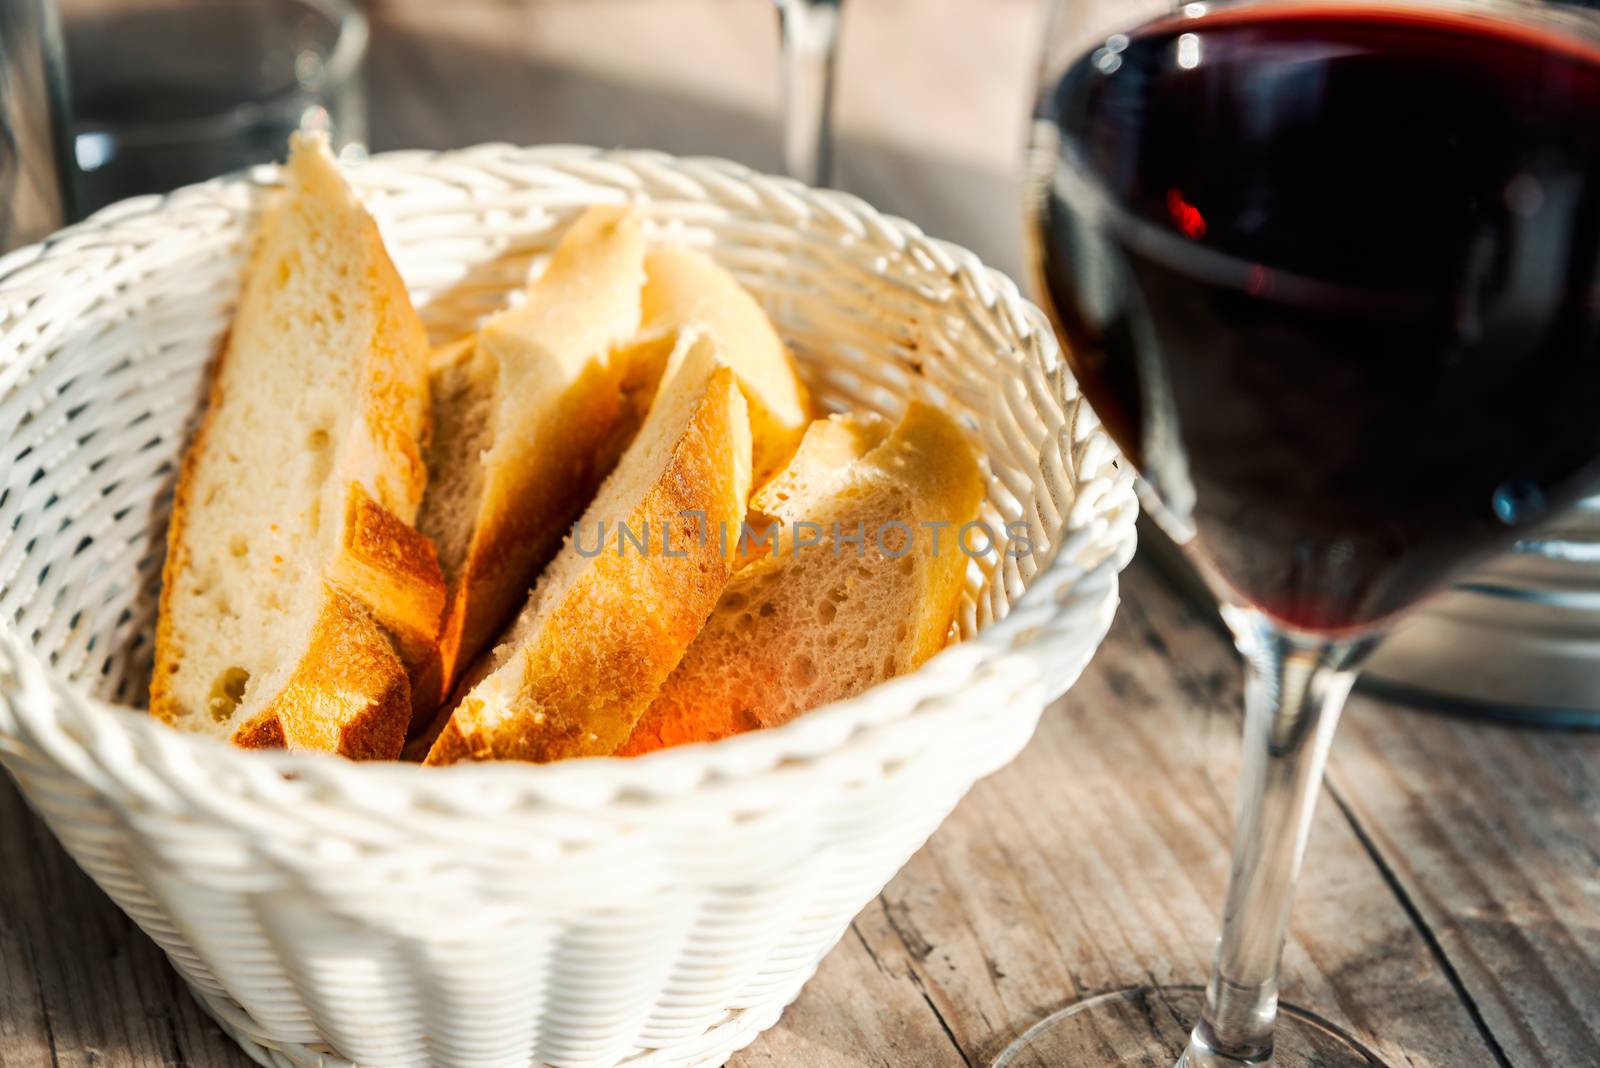 Baguette slices in basket and a glass of red wine by dutourdumonde